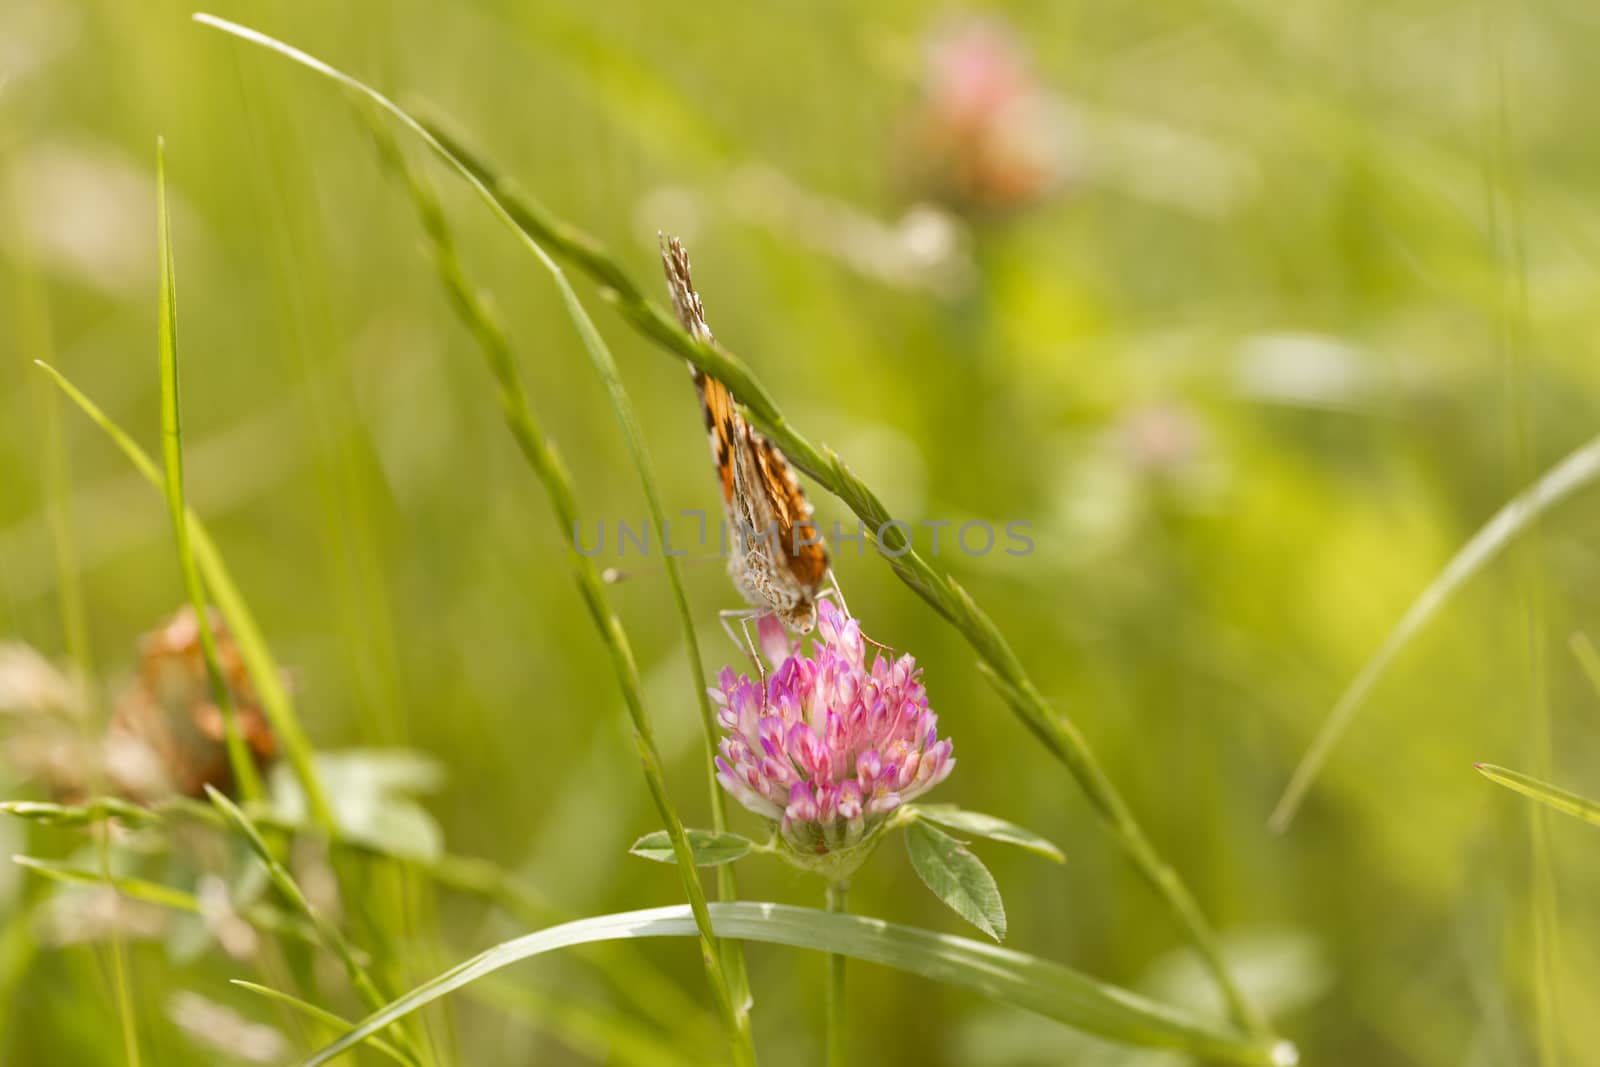 An orange butterfly on wildflower on soft green blurred background.